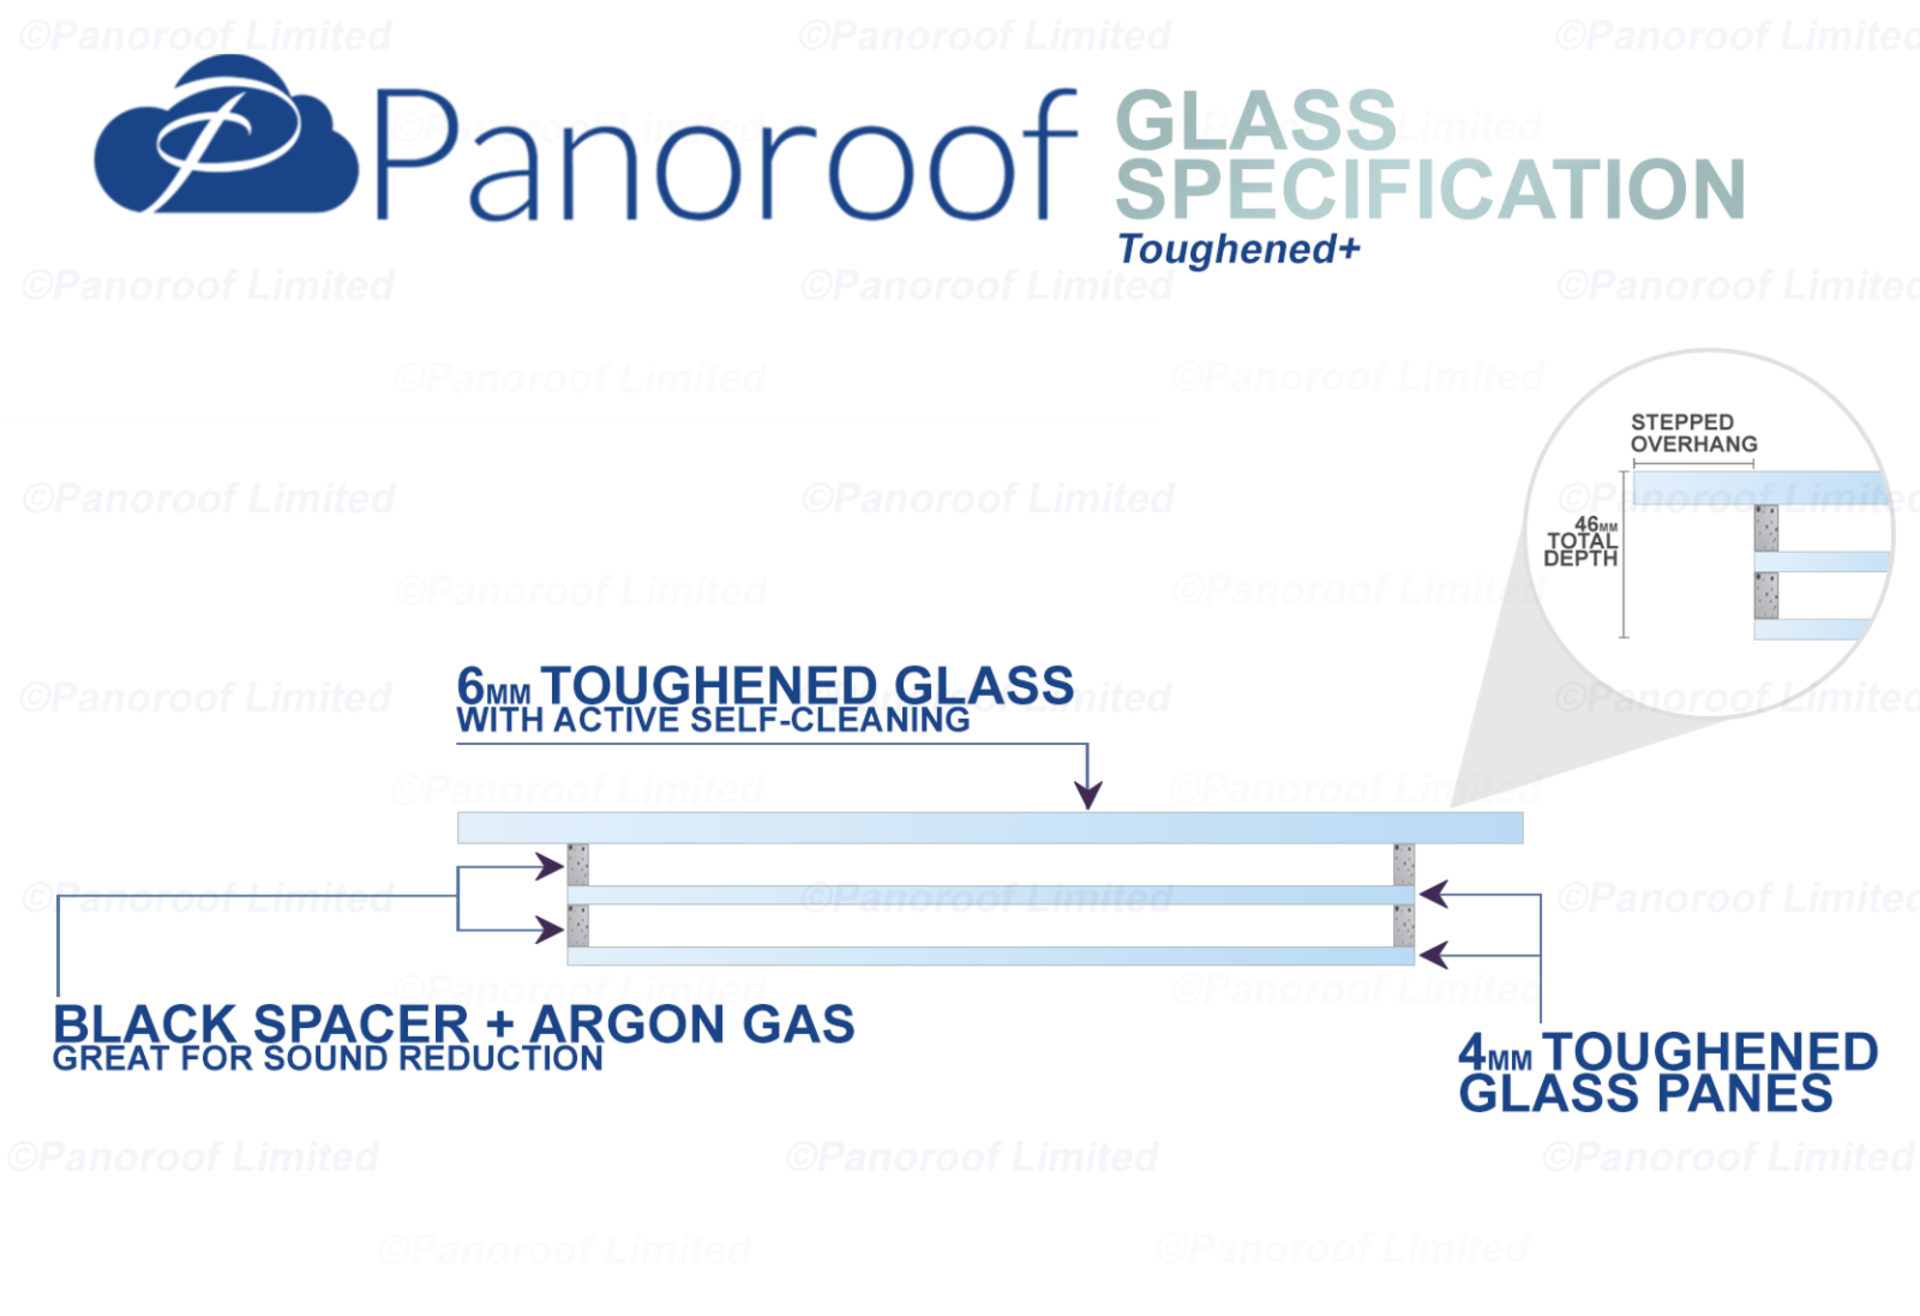 """Panoroof Triple Glazed Self Cleaning 500x500mm (inside Size Visable glass area) Seamless Glass - Image 4 of 6